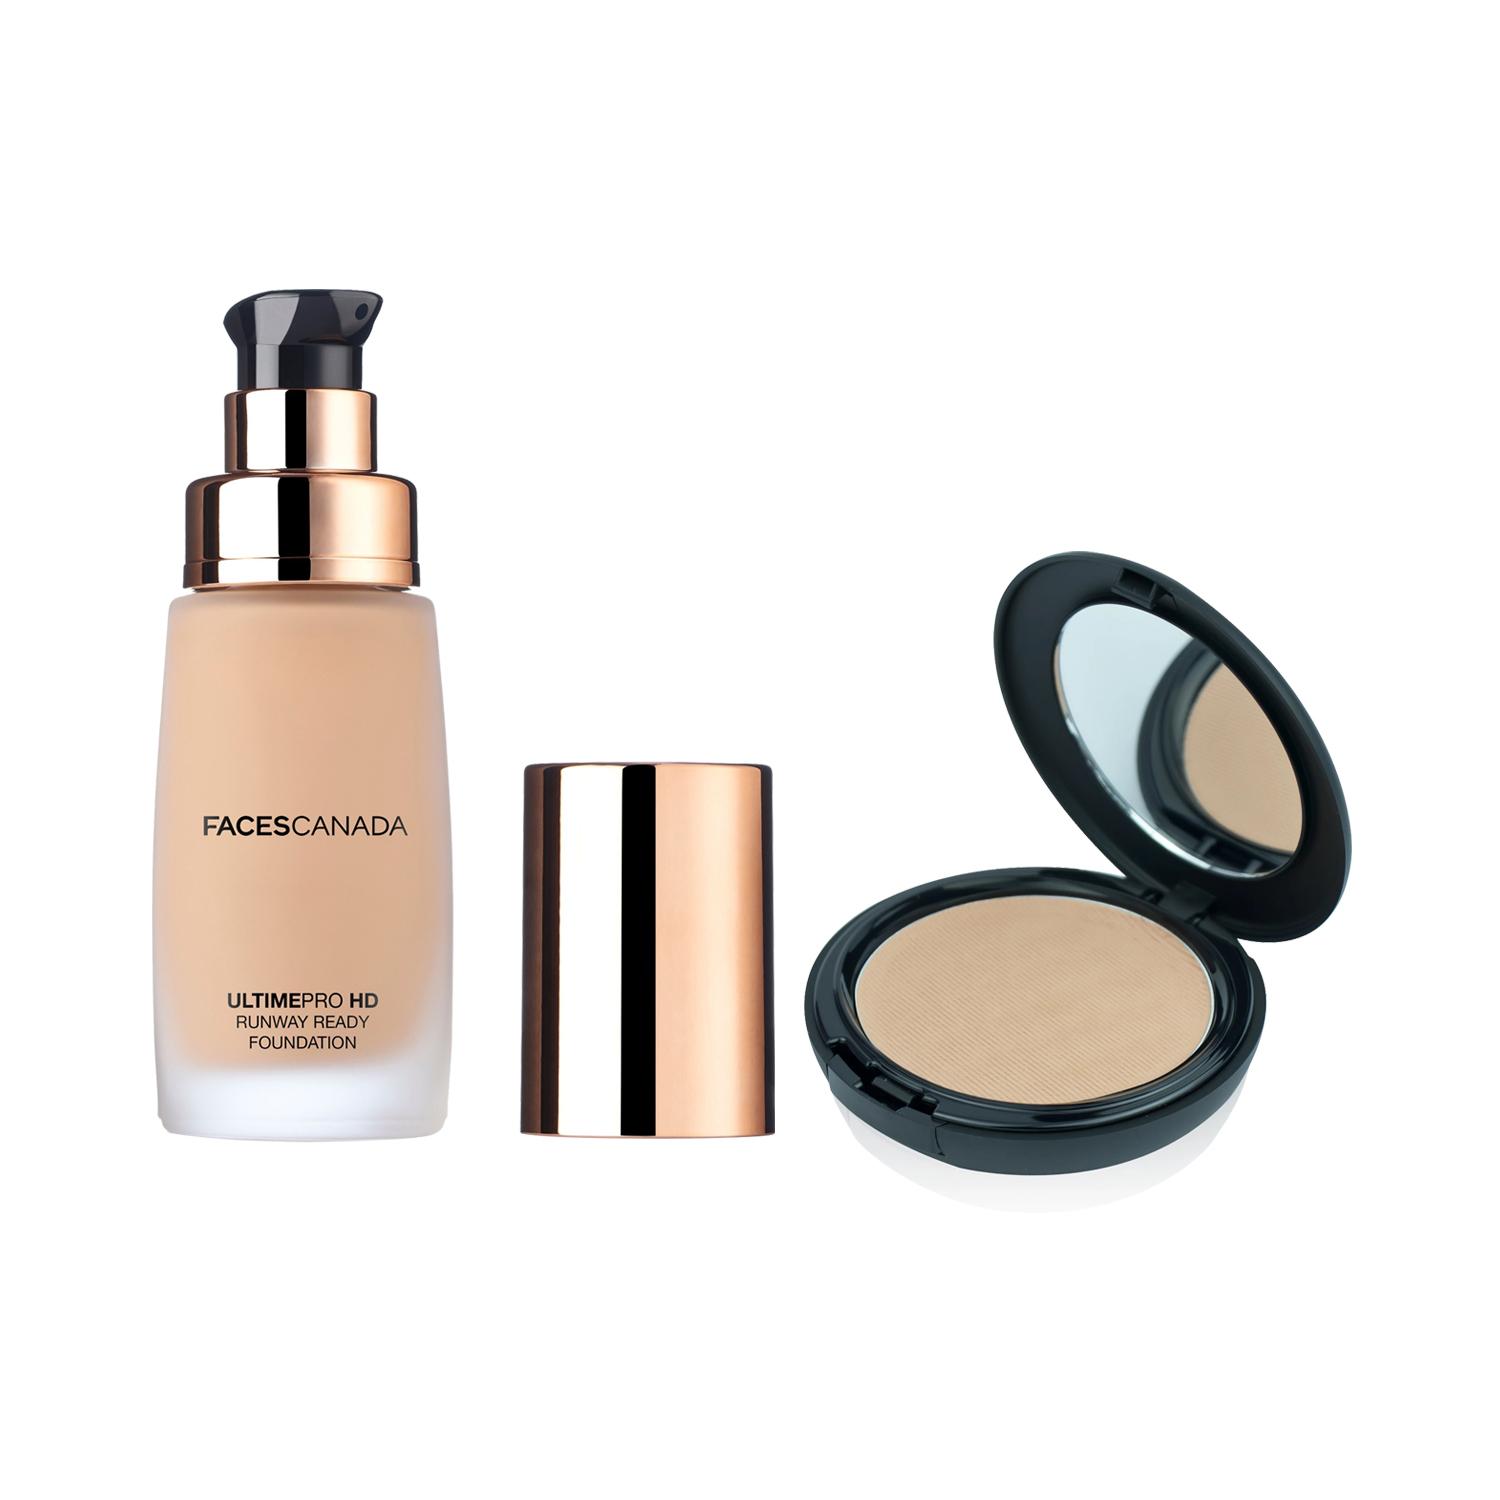 Faces Canada | Faces Canada HD Runway Ready Foundation - Beige (30ml) and Expert Cover Powder - Beige (9g) Combo